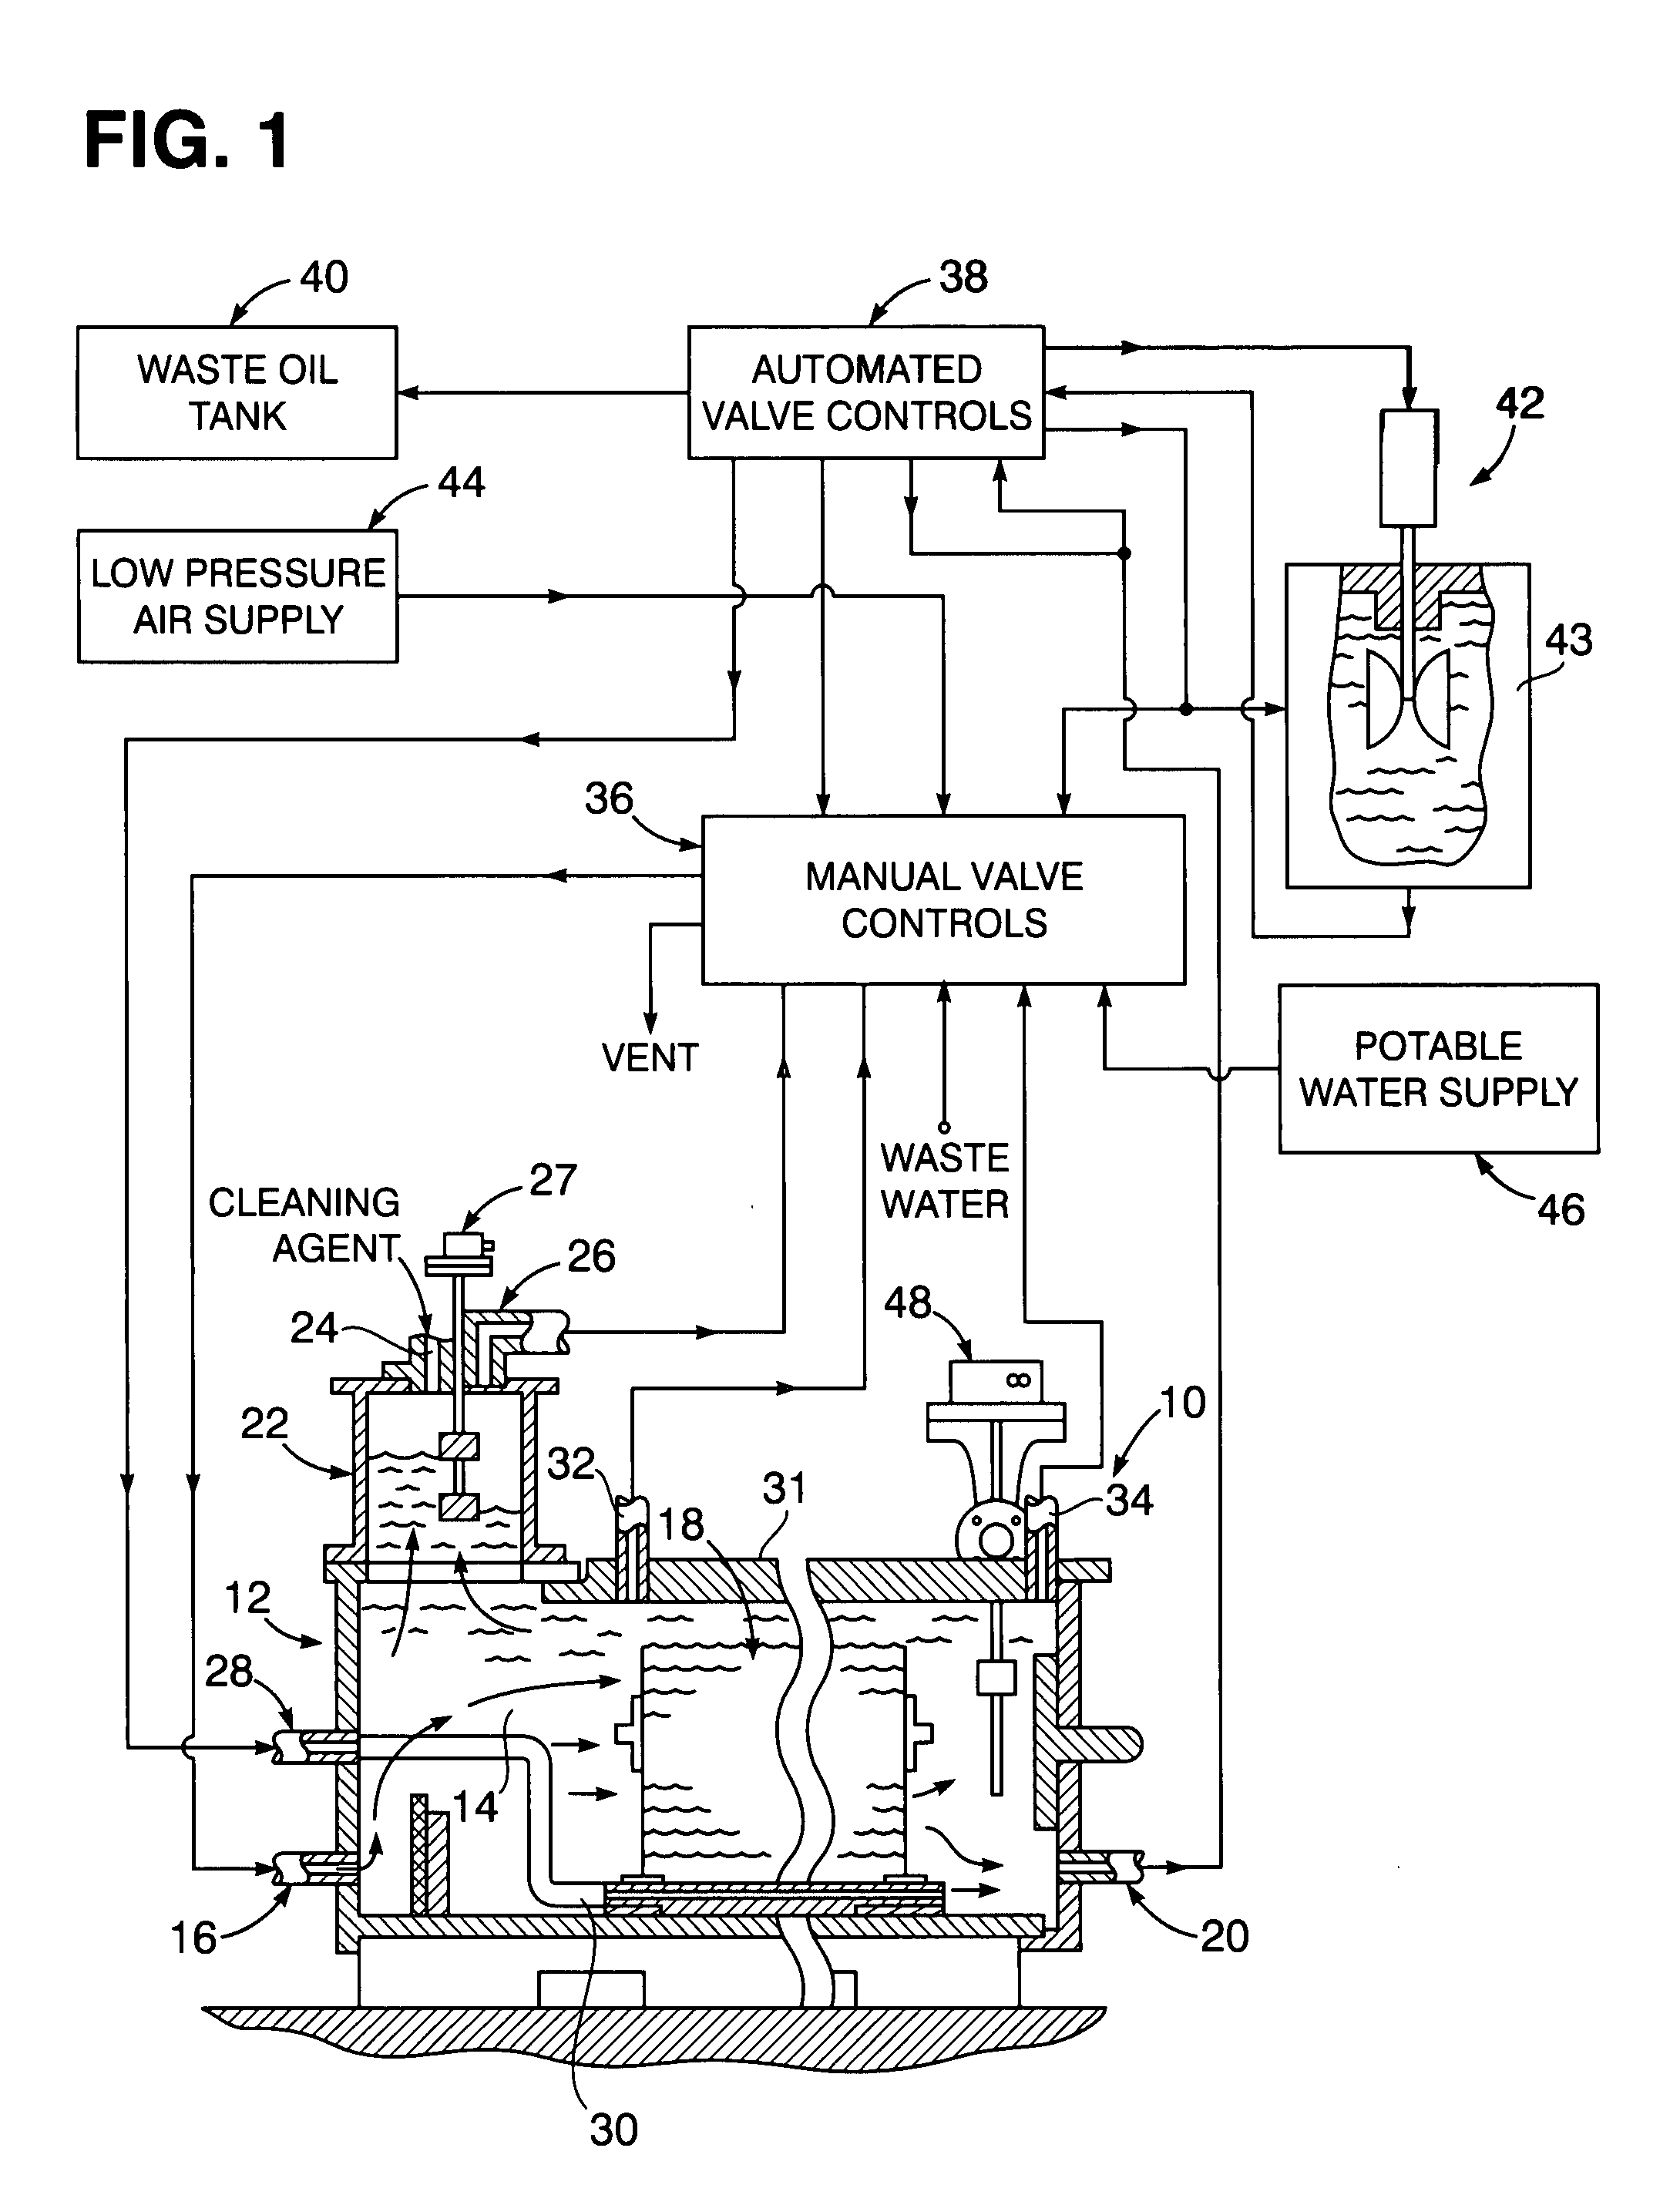 Valve automated in-situ cleaning system for oil water separator